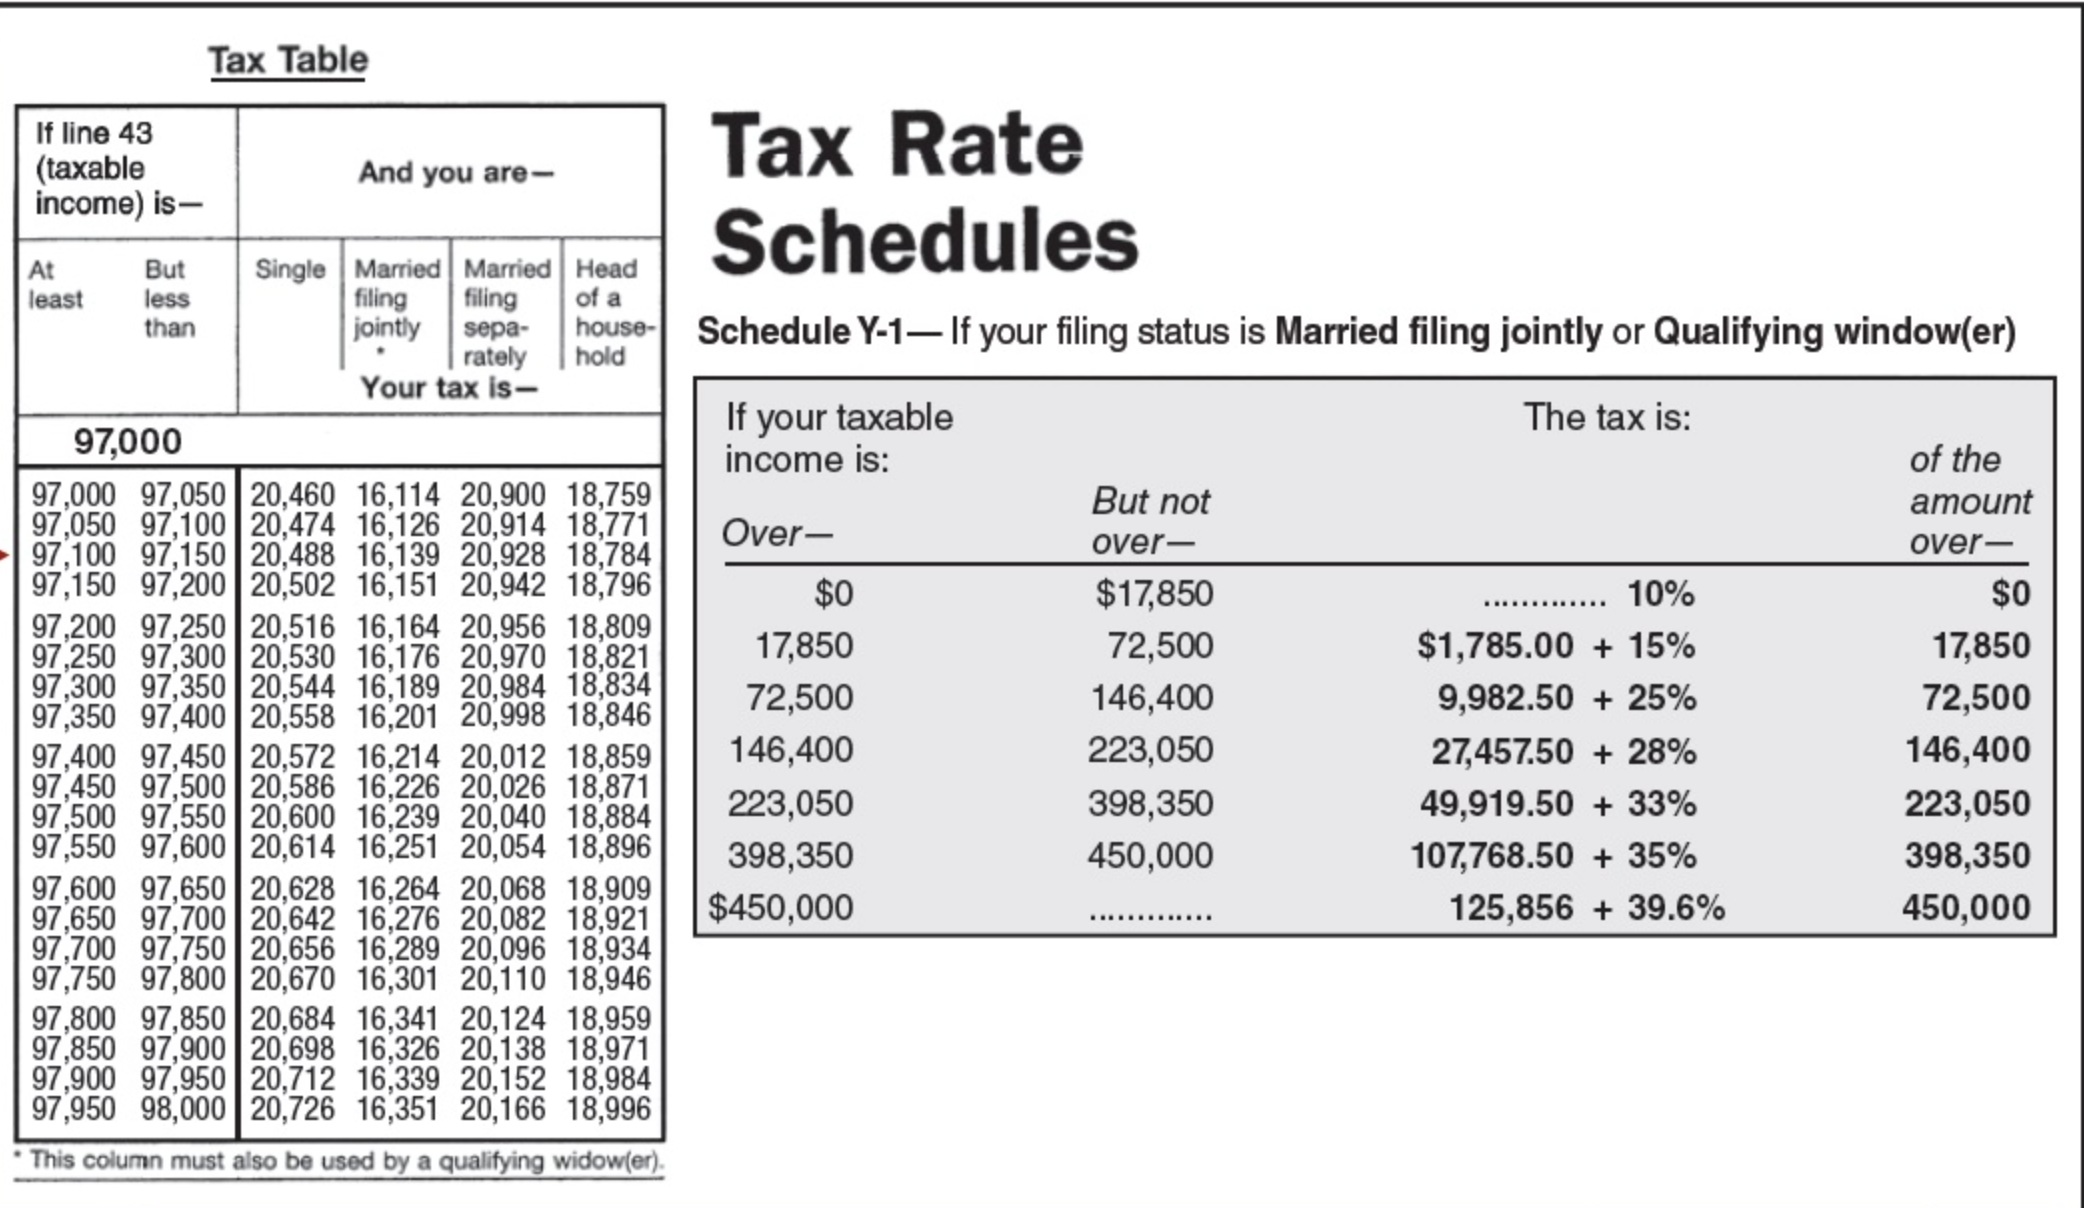 Using the tax table in Exhibit 35, determine the amount of taxes for